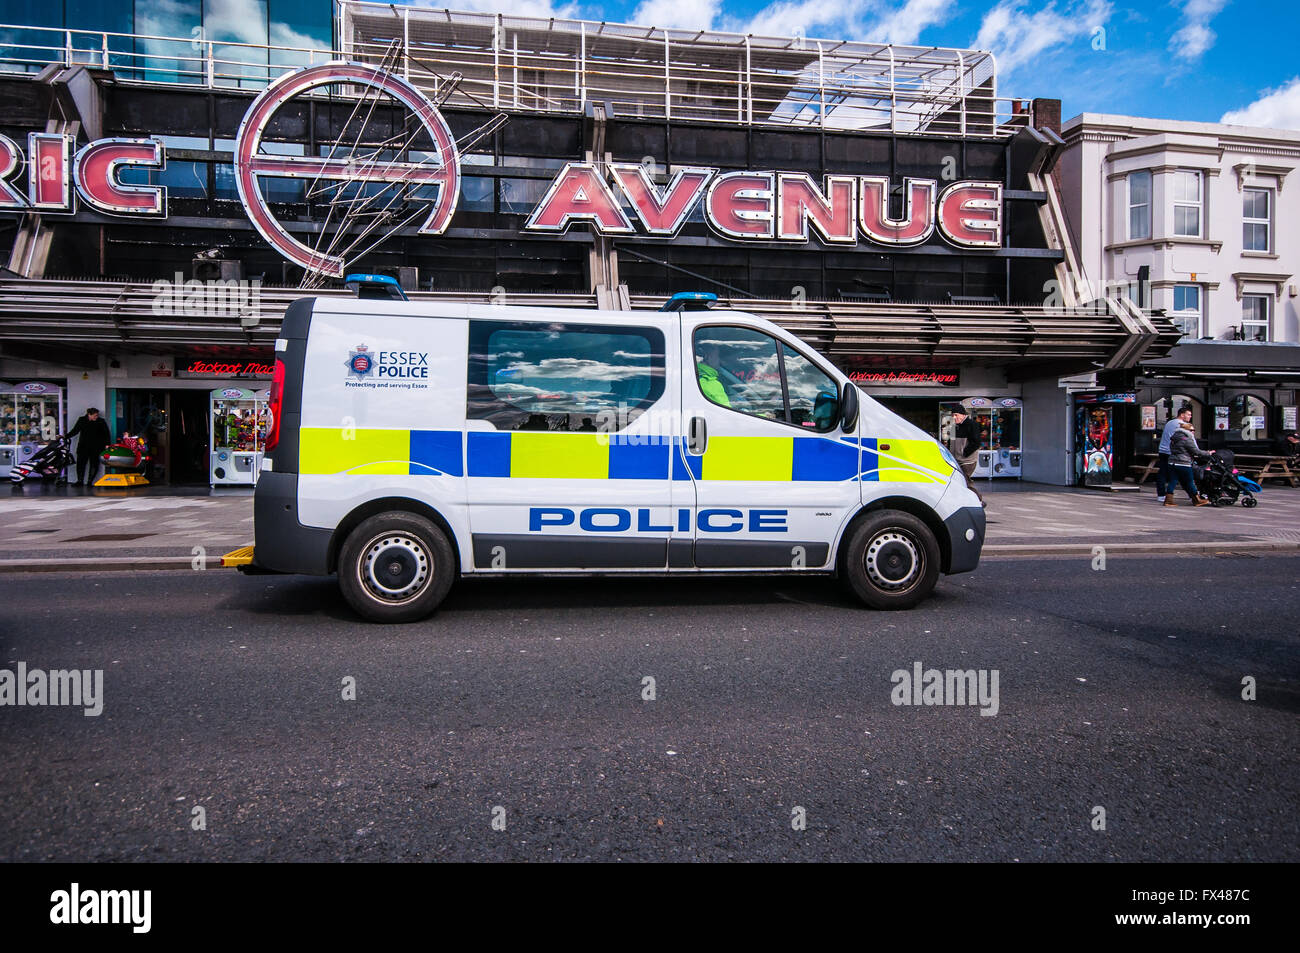 Seafront amusement arcades in Southend-on-Sea, Essex, UK. Police attending Stock Photo